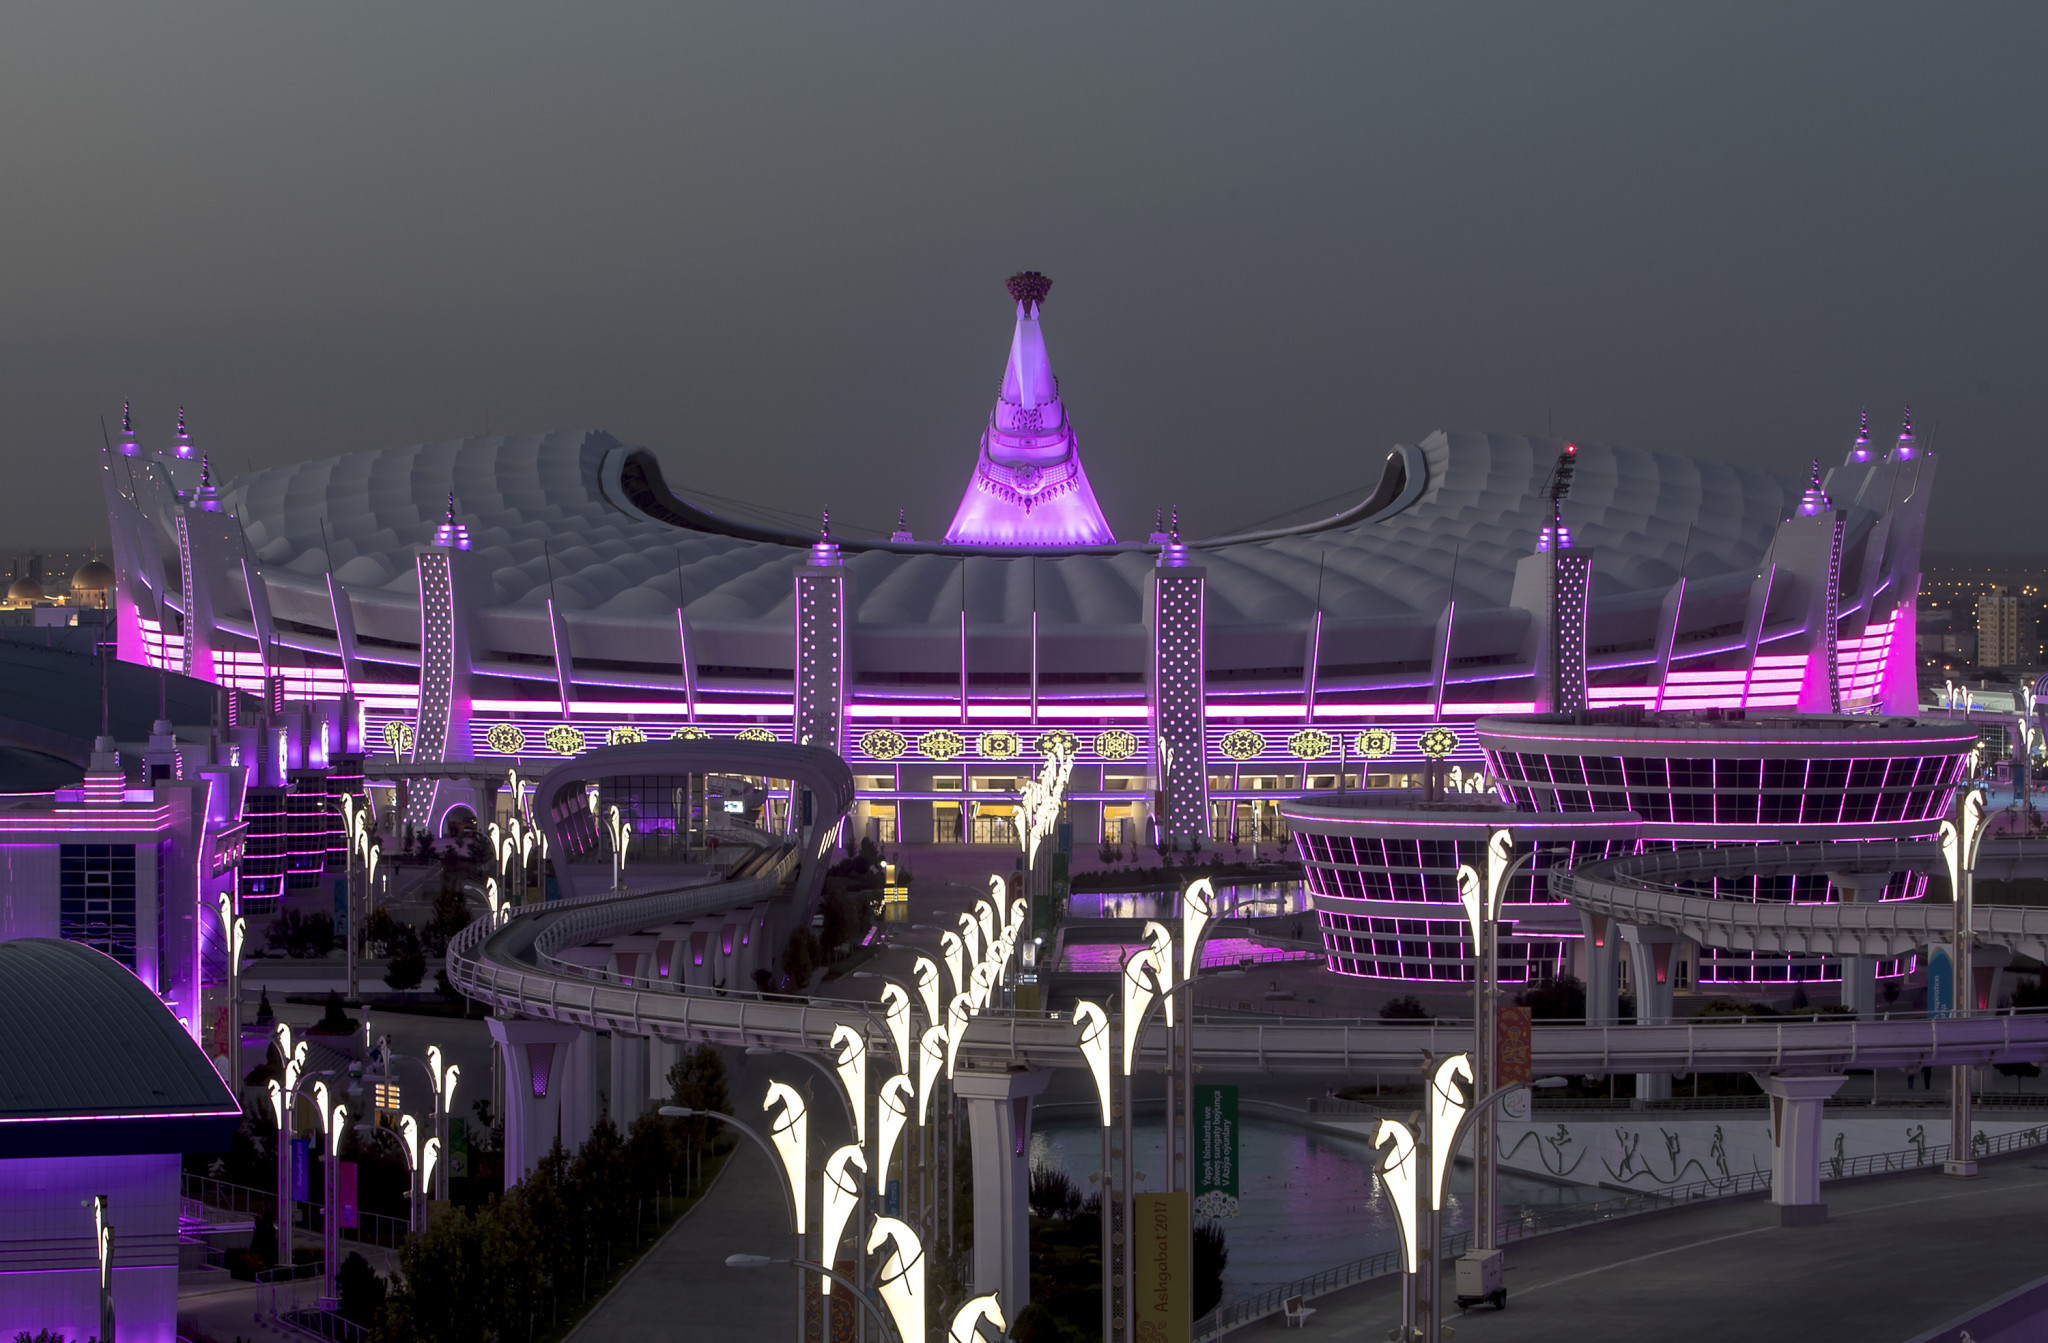 The Ashgabat Olympic Complex is playing host to the 2017 Asian Indoor and Martial Arts Games ©Ashgabat 2017/Angelos Zymaras/Laurel International Management